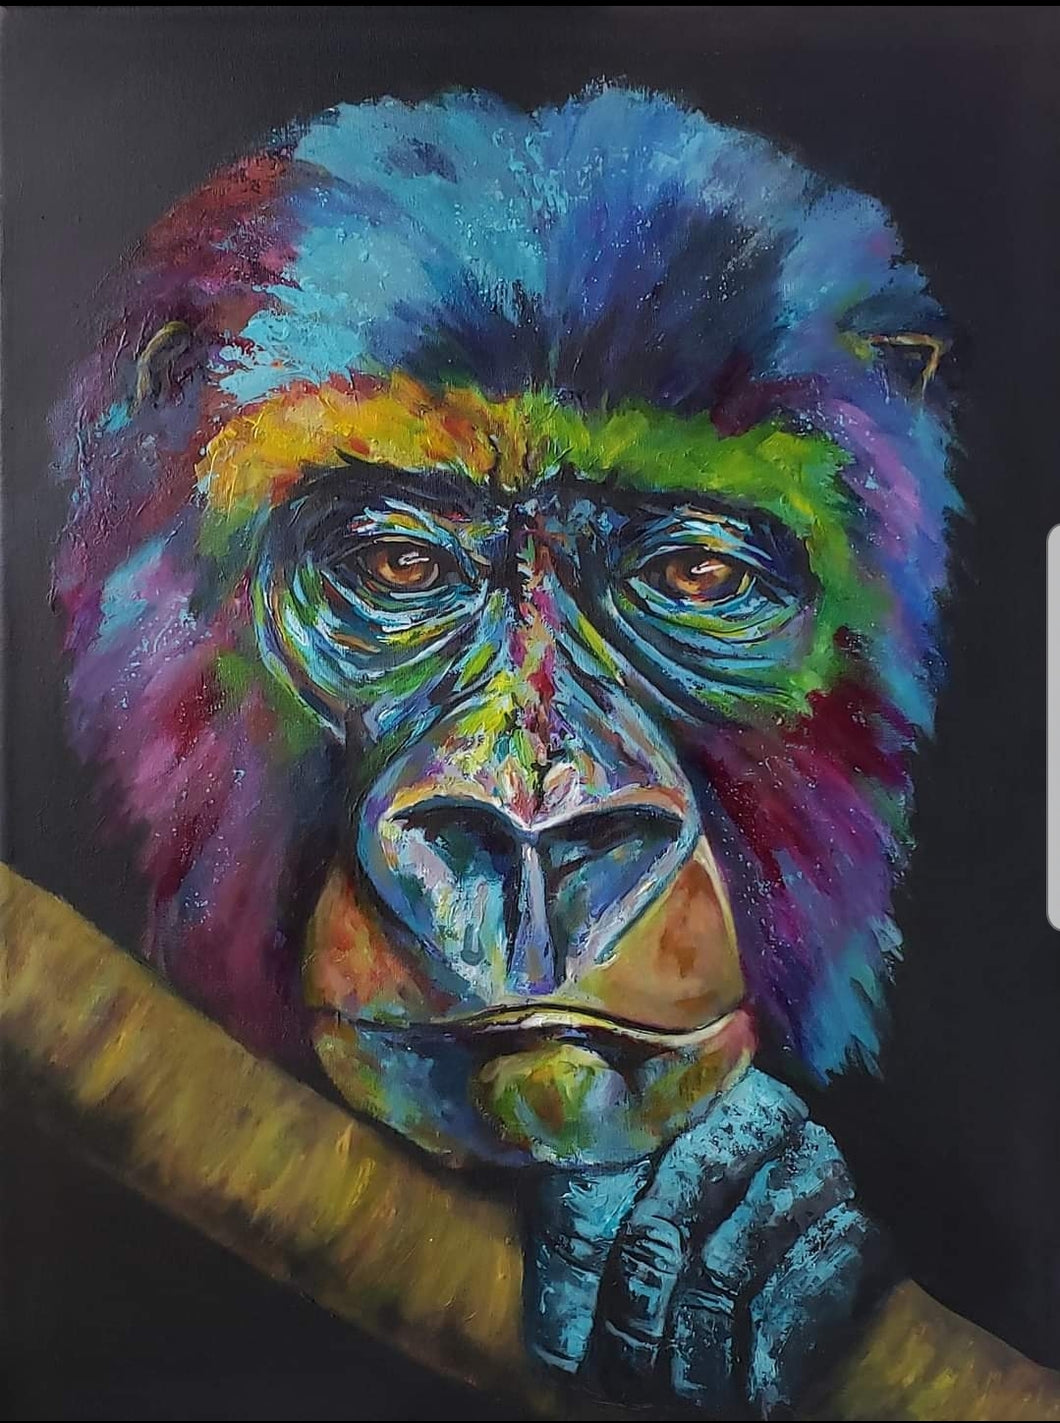 Lowland Gorilla Painting - Original Painting 2021 (Canada) by Eclectic Studio